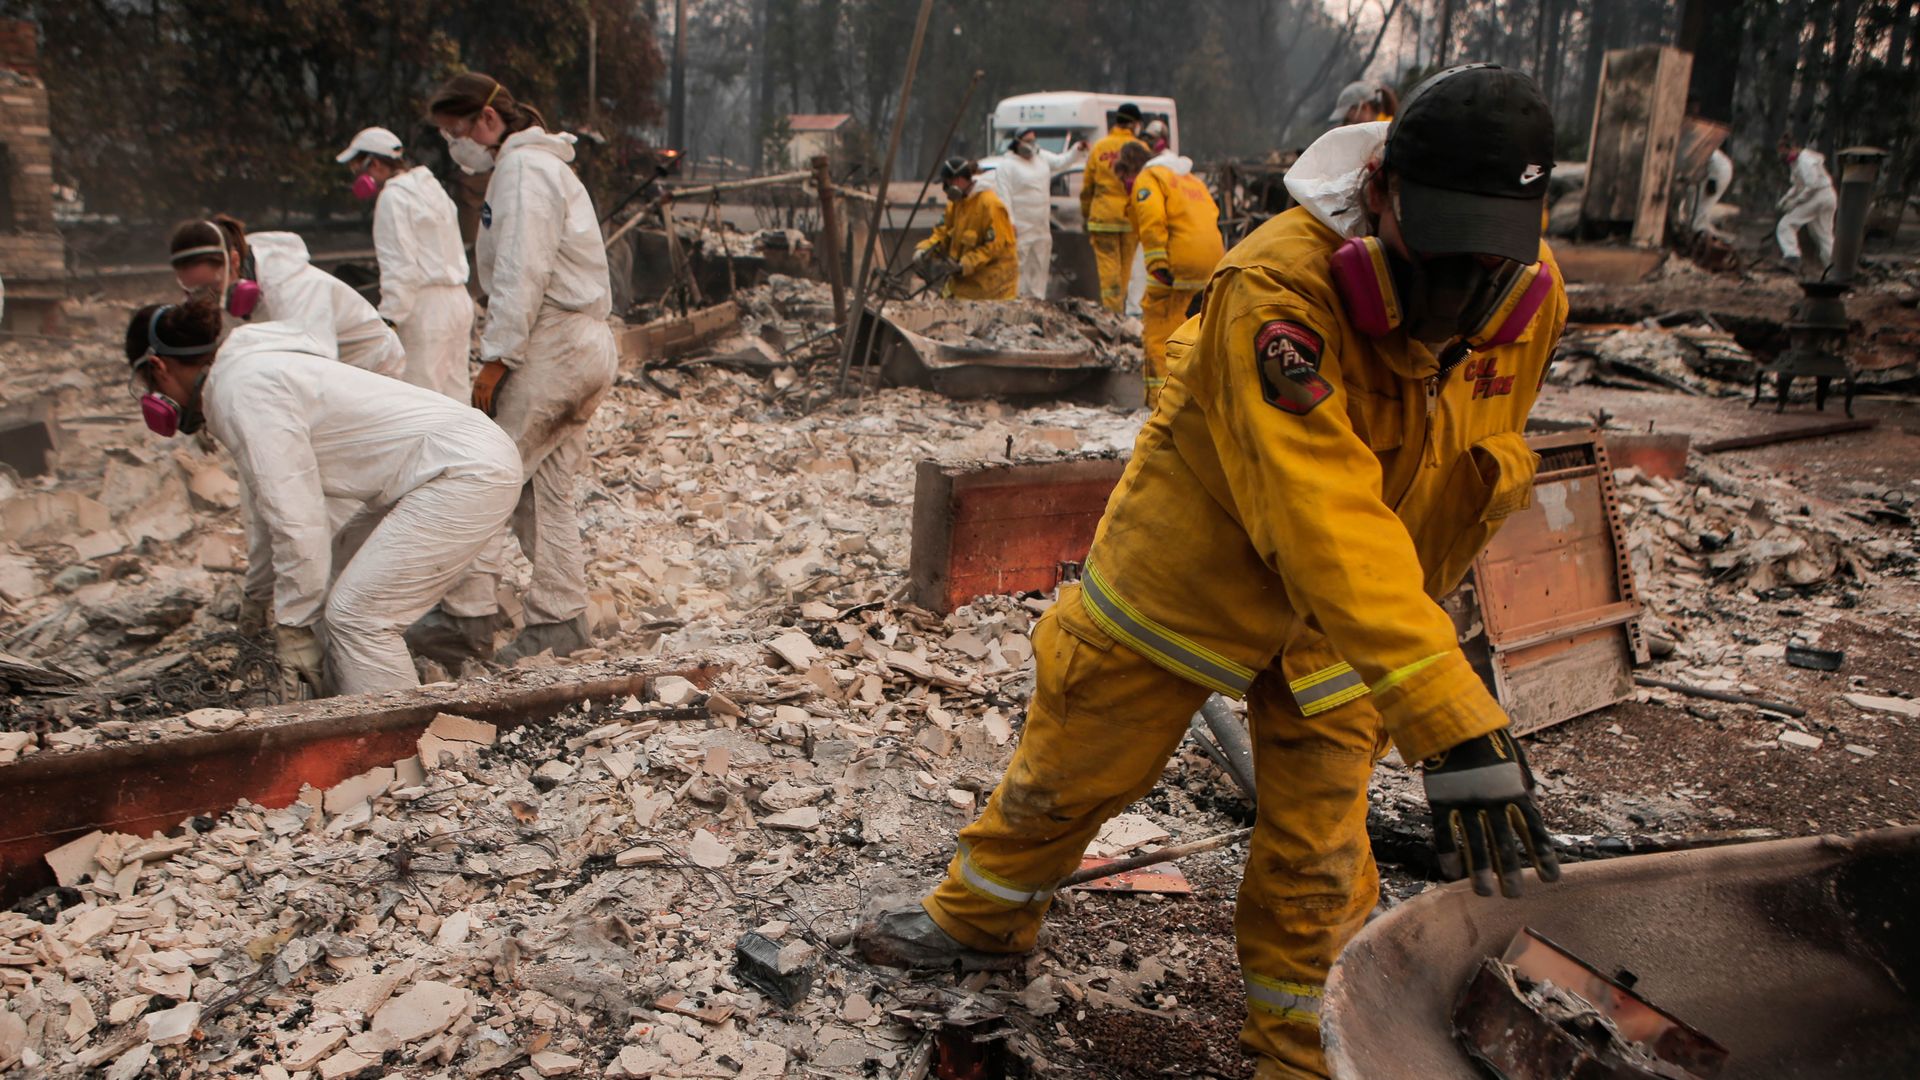 The Human Identification Laboratory sorts through fire rubble to try and find victims of the Camp Fire in Paradise, Calif. Sunday.